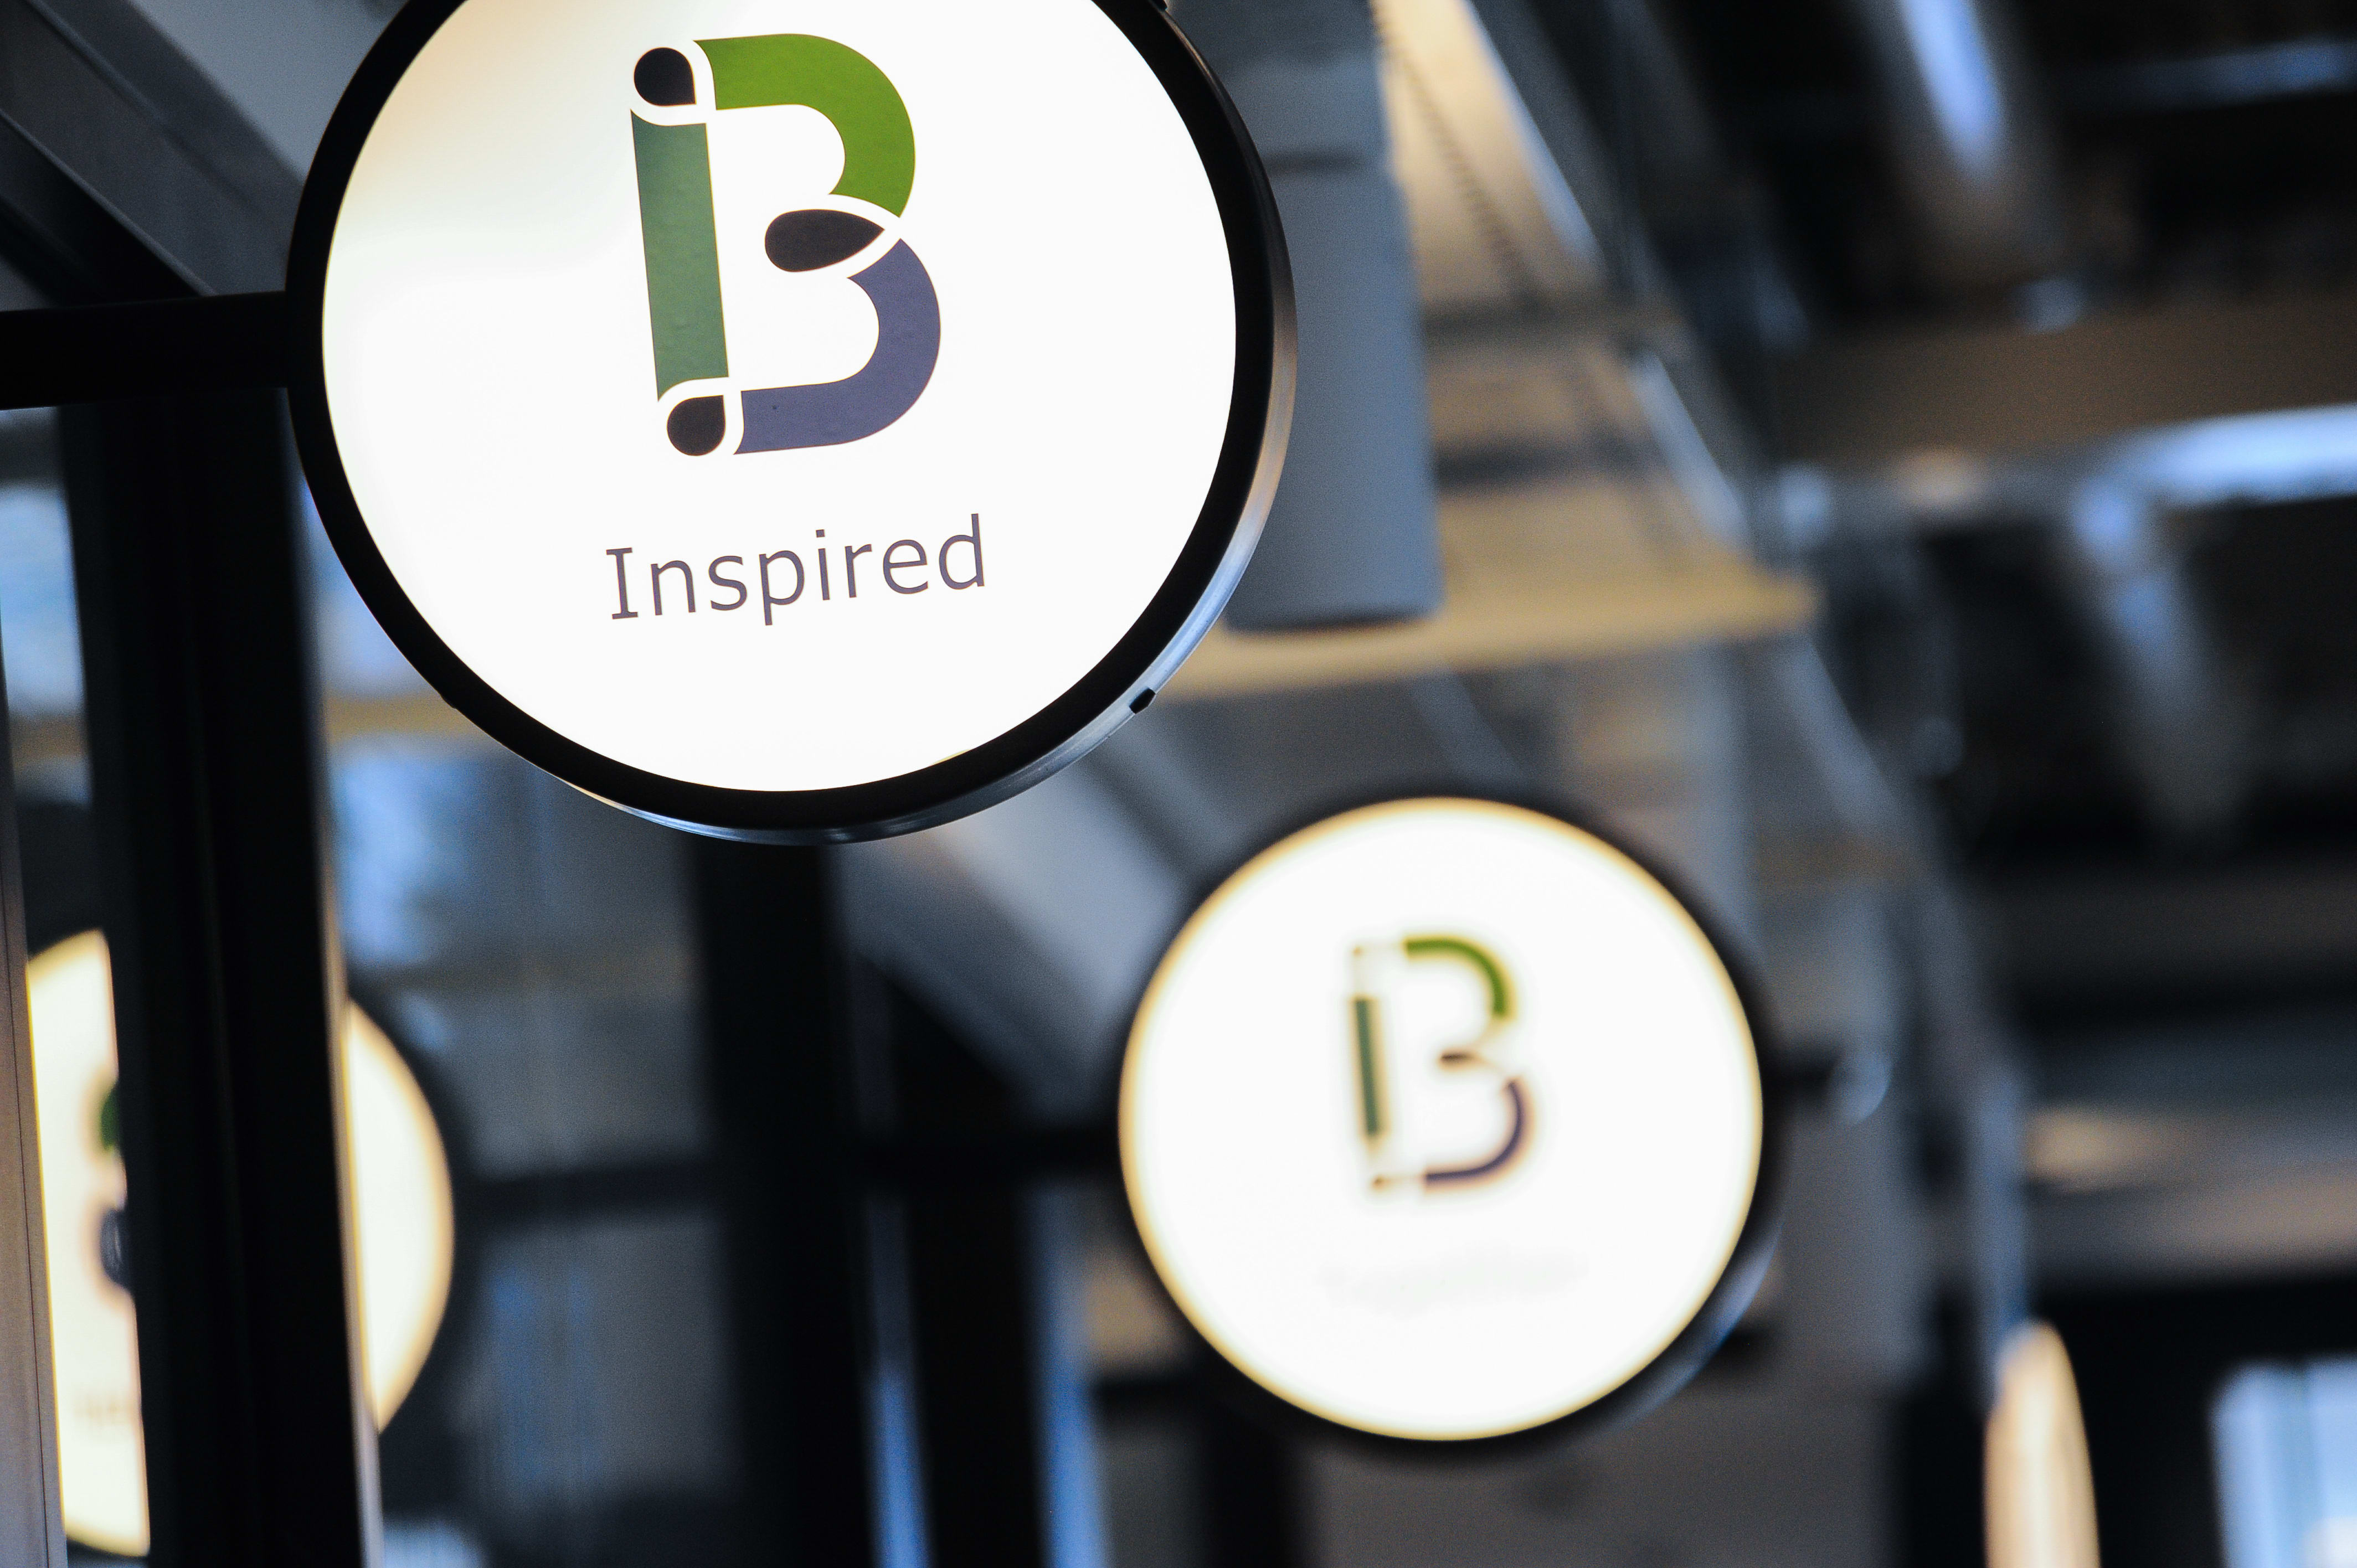 Behalf logo on a lit sign that reads "B inspired"